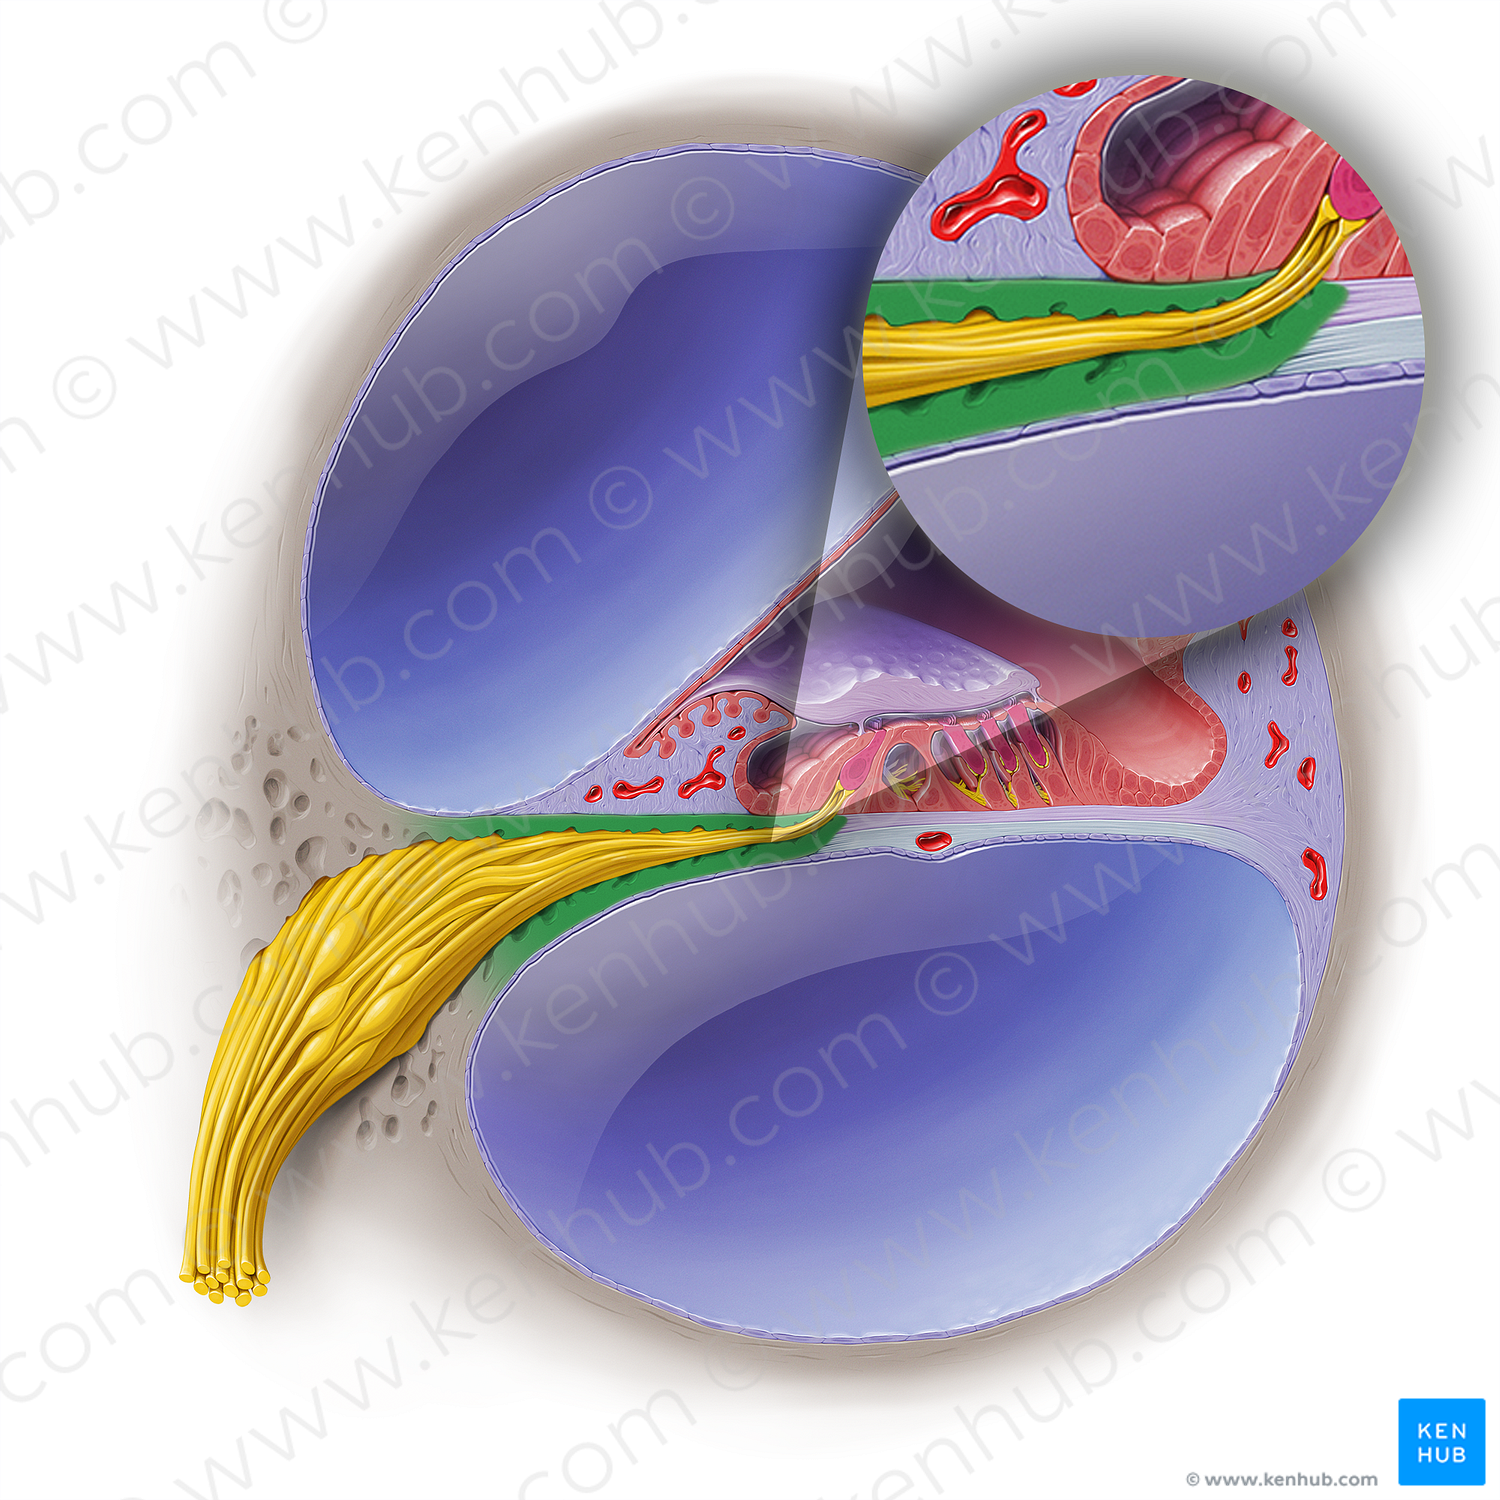 Osseous spiral lamina of cochlea (#19041)